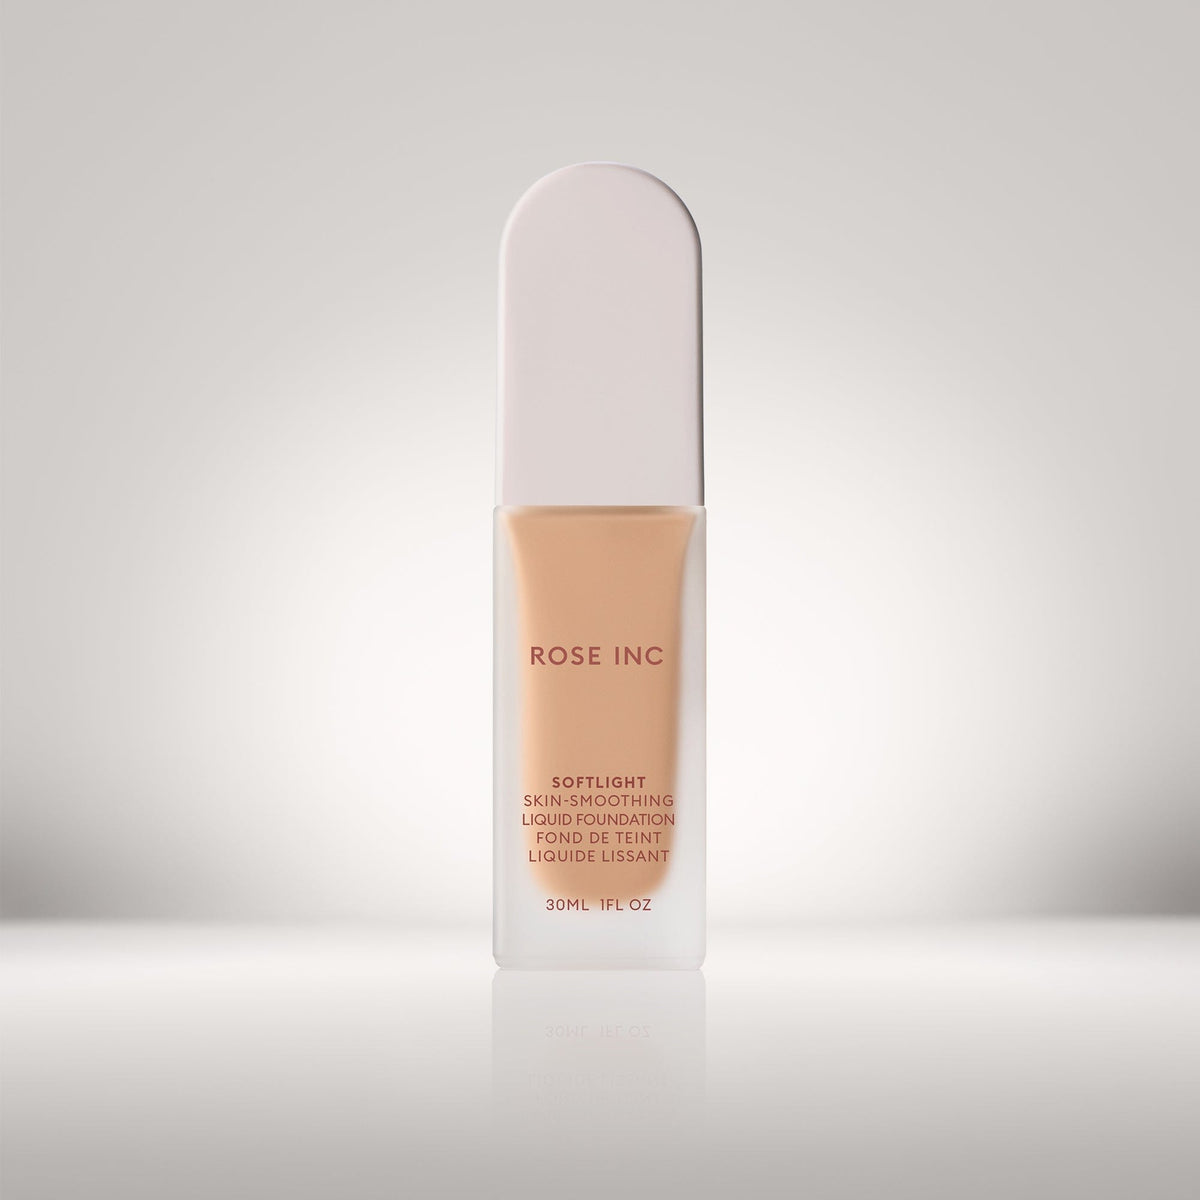 Soldier image of shade 14W in Softlight Smoothing Foundation